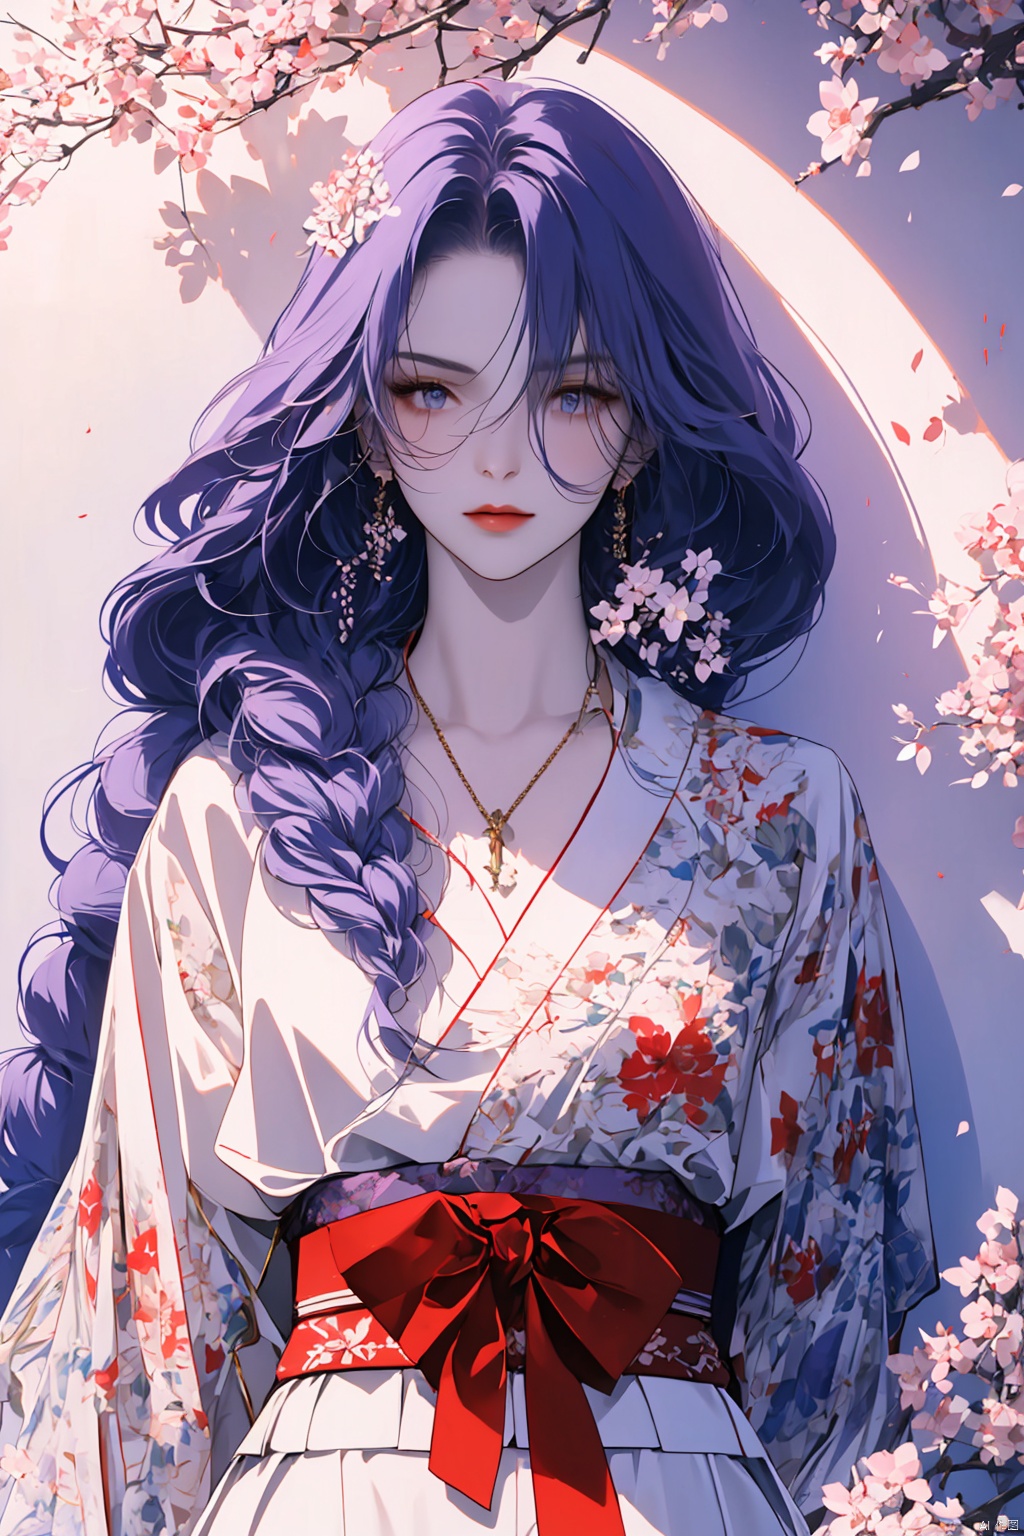  1girl, purple hair, dark purple hair, purple clip on hair, wearing Japanese clothes, Japanese clothes, purple and white Japanese clothes, holding a sword, holding a purple shiny sword, glowing purple sword, Japanese type sword, background charry blossom trees, beautiful pinkish charry blossom trees, dark purple sky, look at the view, lora:more_details:0.5, vibrant colors, masterpiece, sharp focus, best quality, depth of field, cinematic lighting, lora:more_details:0.5, （\personality\）